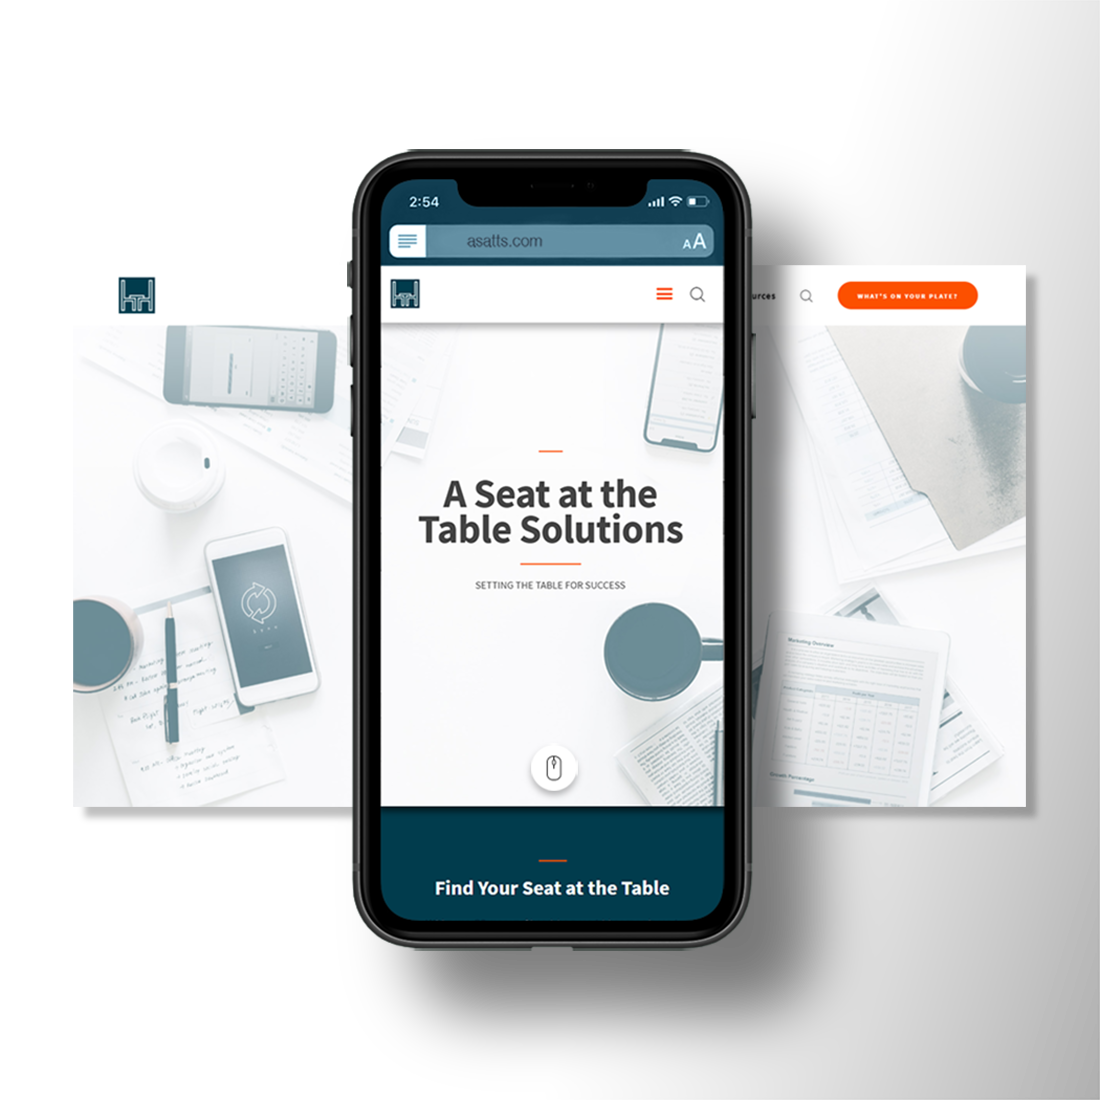 Image of a seat at the table solutions case study